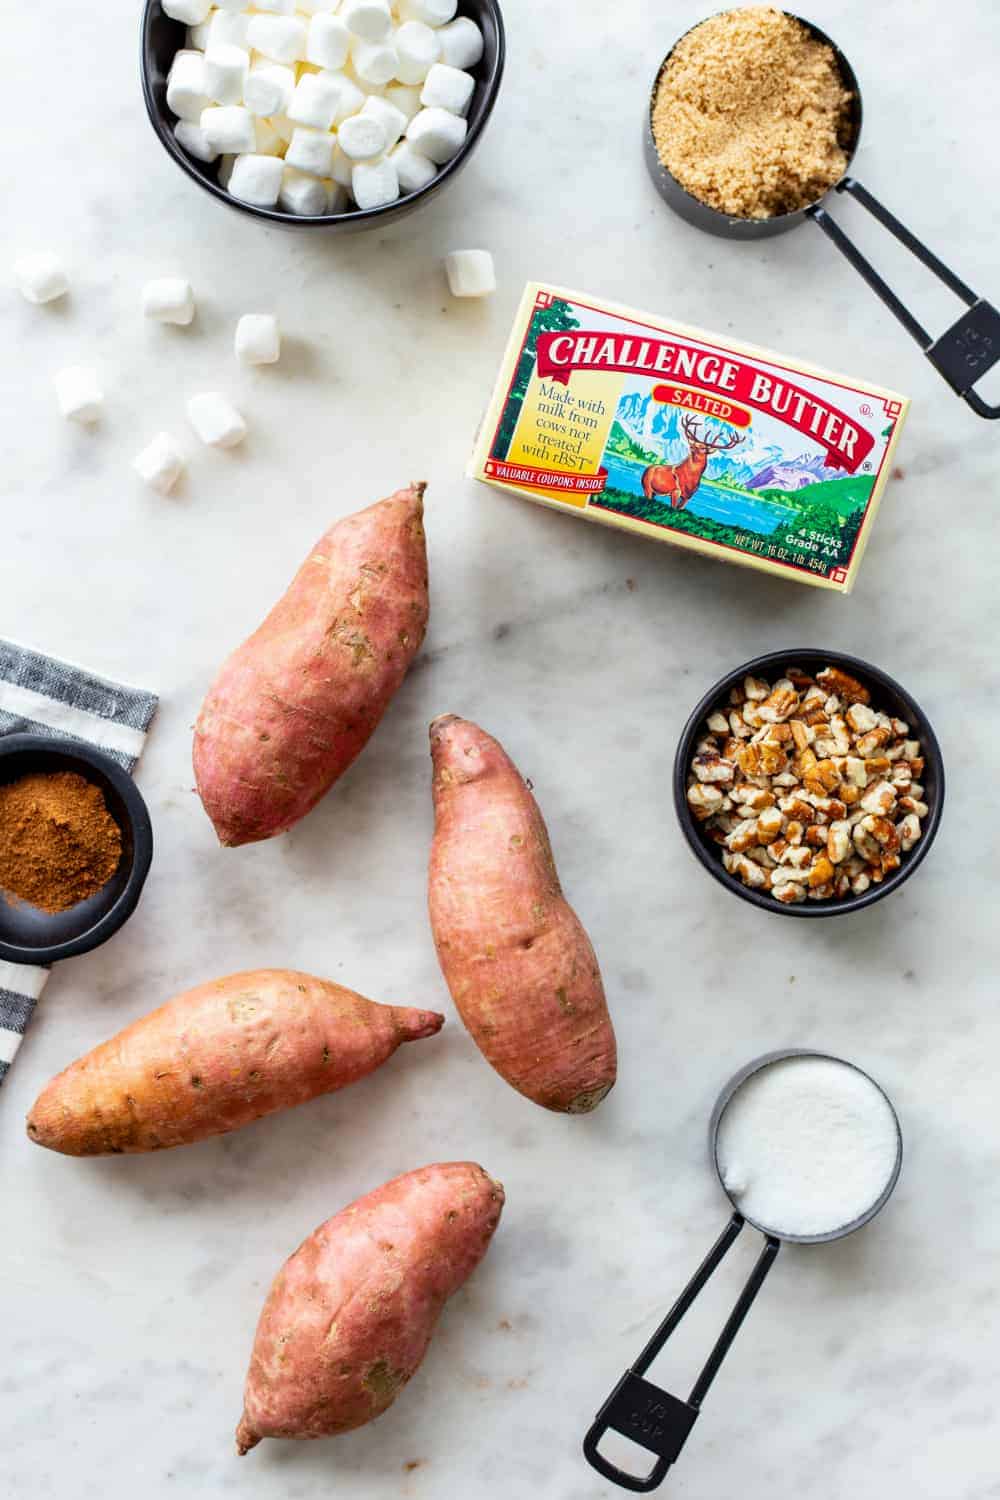 Ingredients for sweet potato casserole on a marble countertop